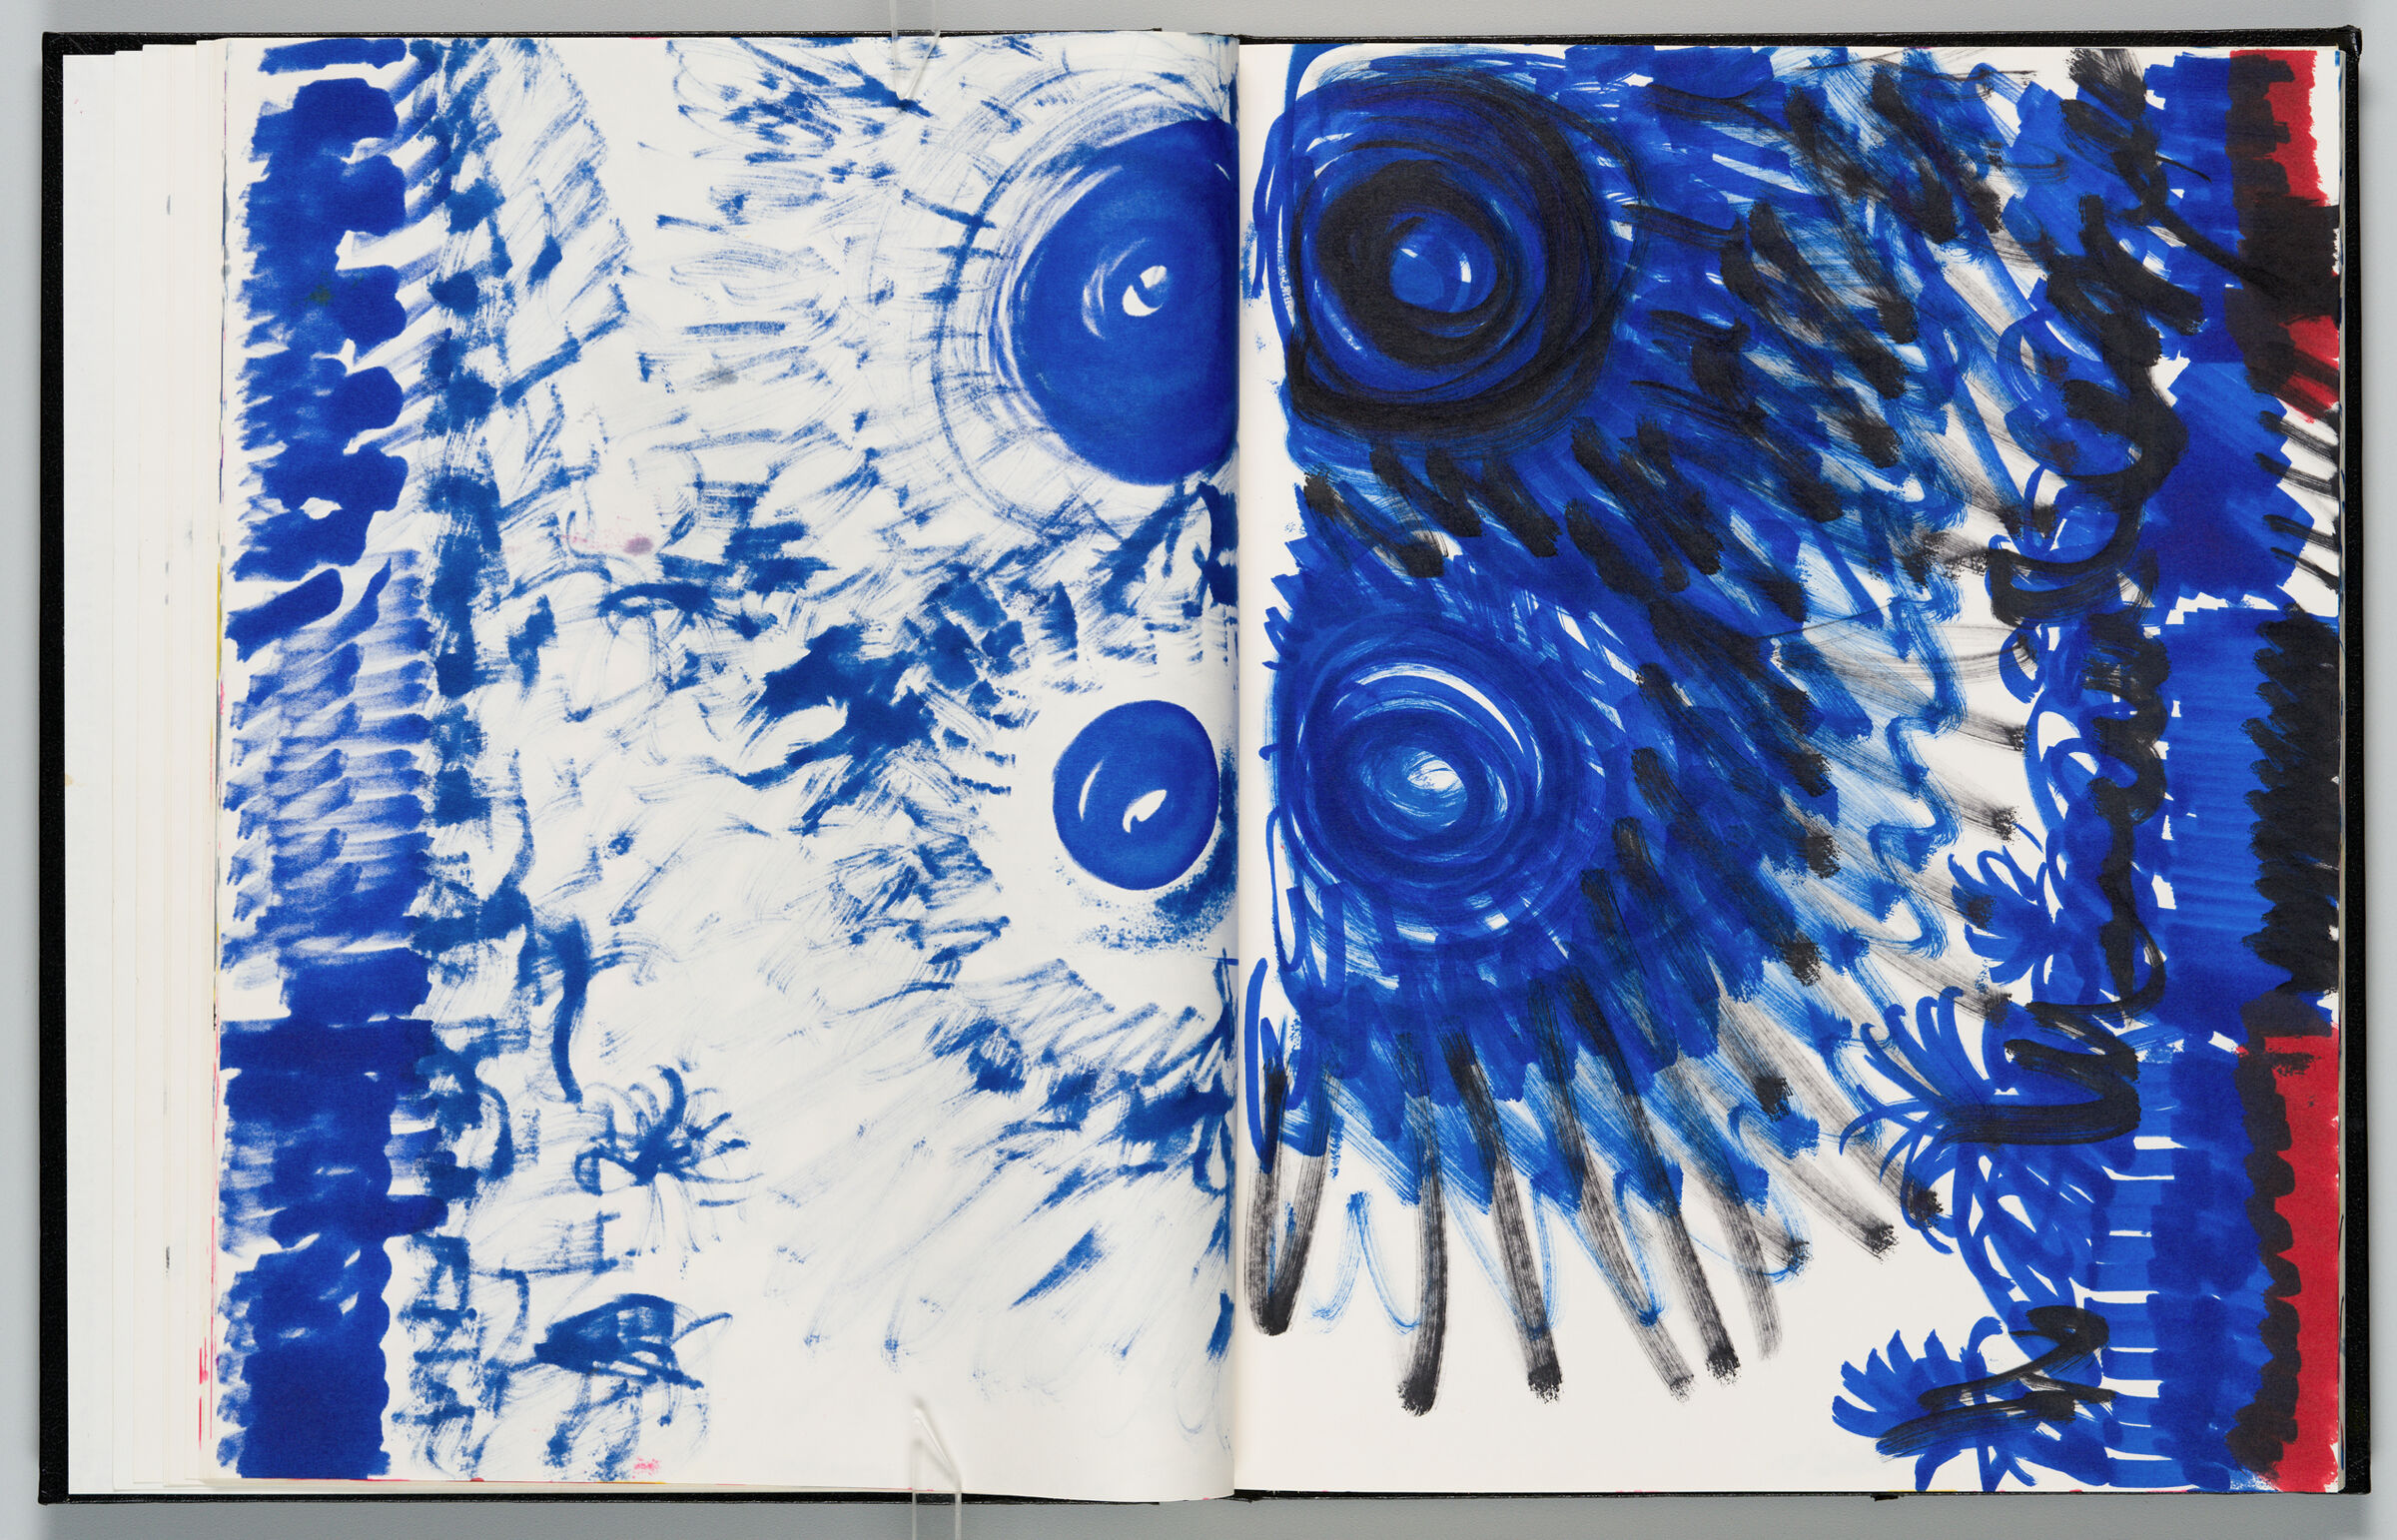 Untitled (Bleed-Through Of Previous Page, Left Page); Untitled (View Of Taroundant With Star/Sun Bursts, Right Page)